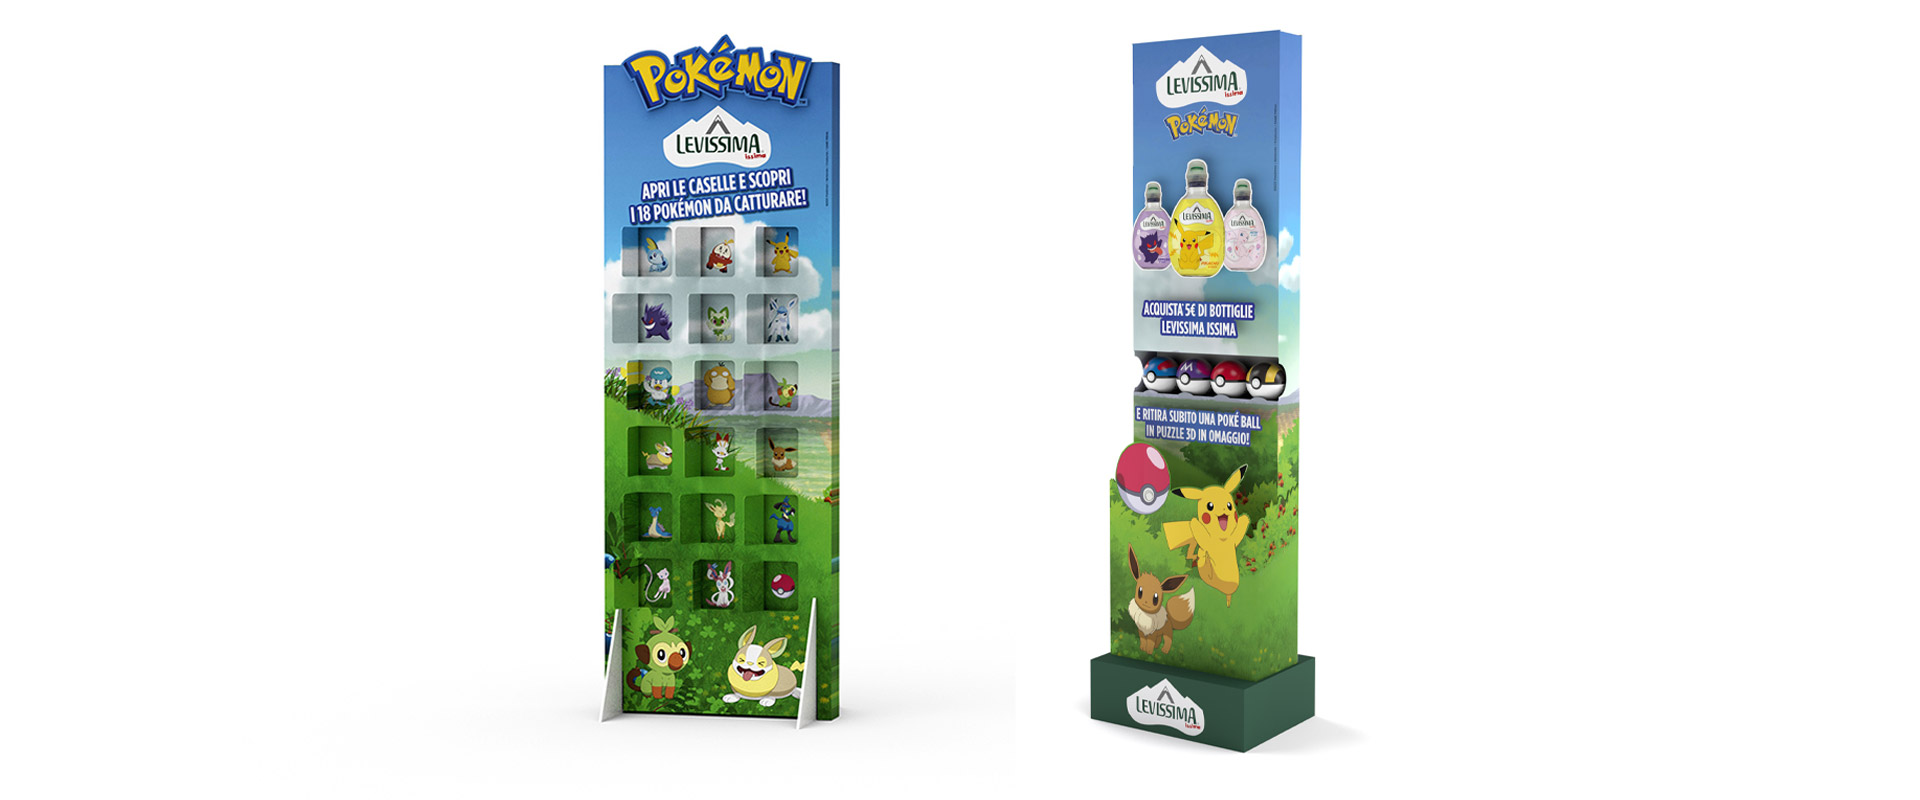 The Issima Pokémon totem and pop-up display unit ATC created for Levissima, with characters to find and Poké Balls included